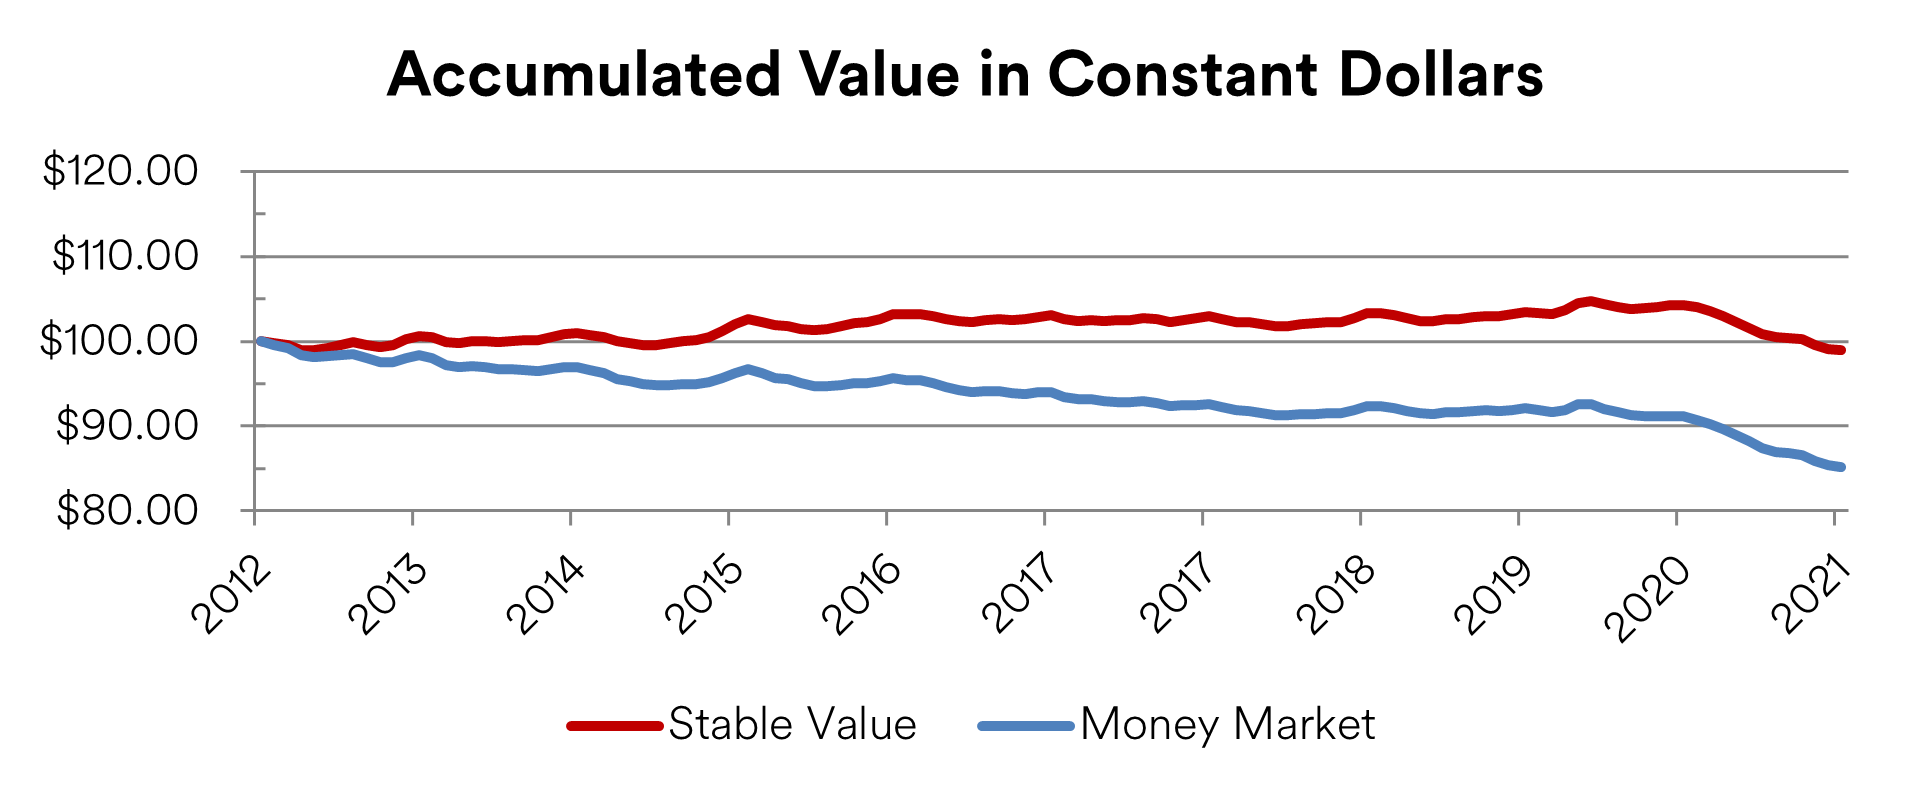 Accumulated Value in Constant Dollars